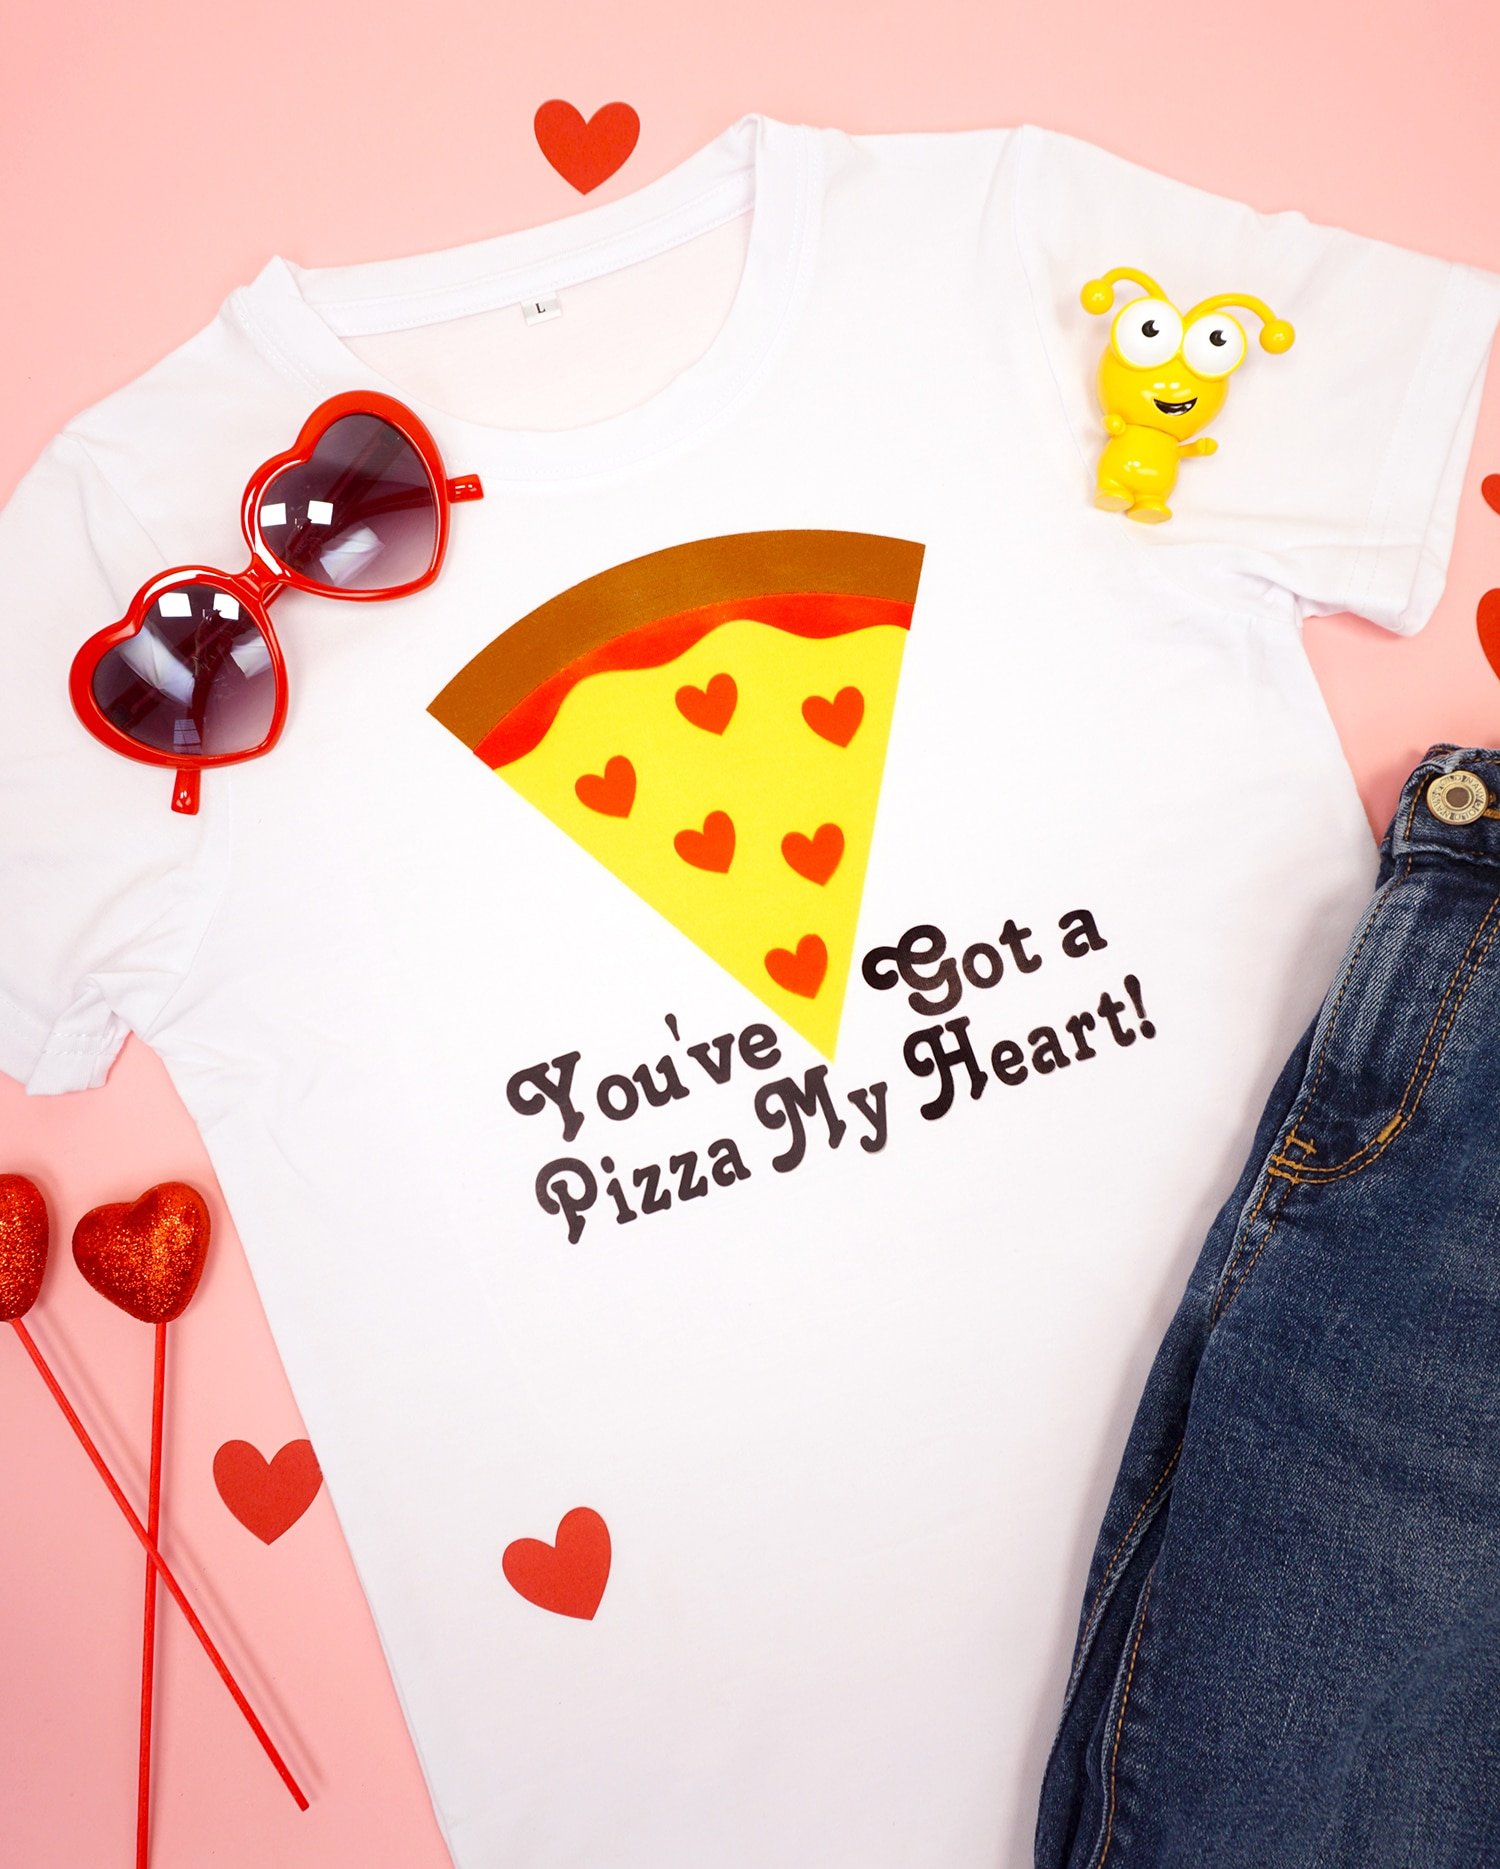 youve got a pizza my heart svg file on tshirt with accessories